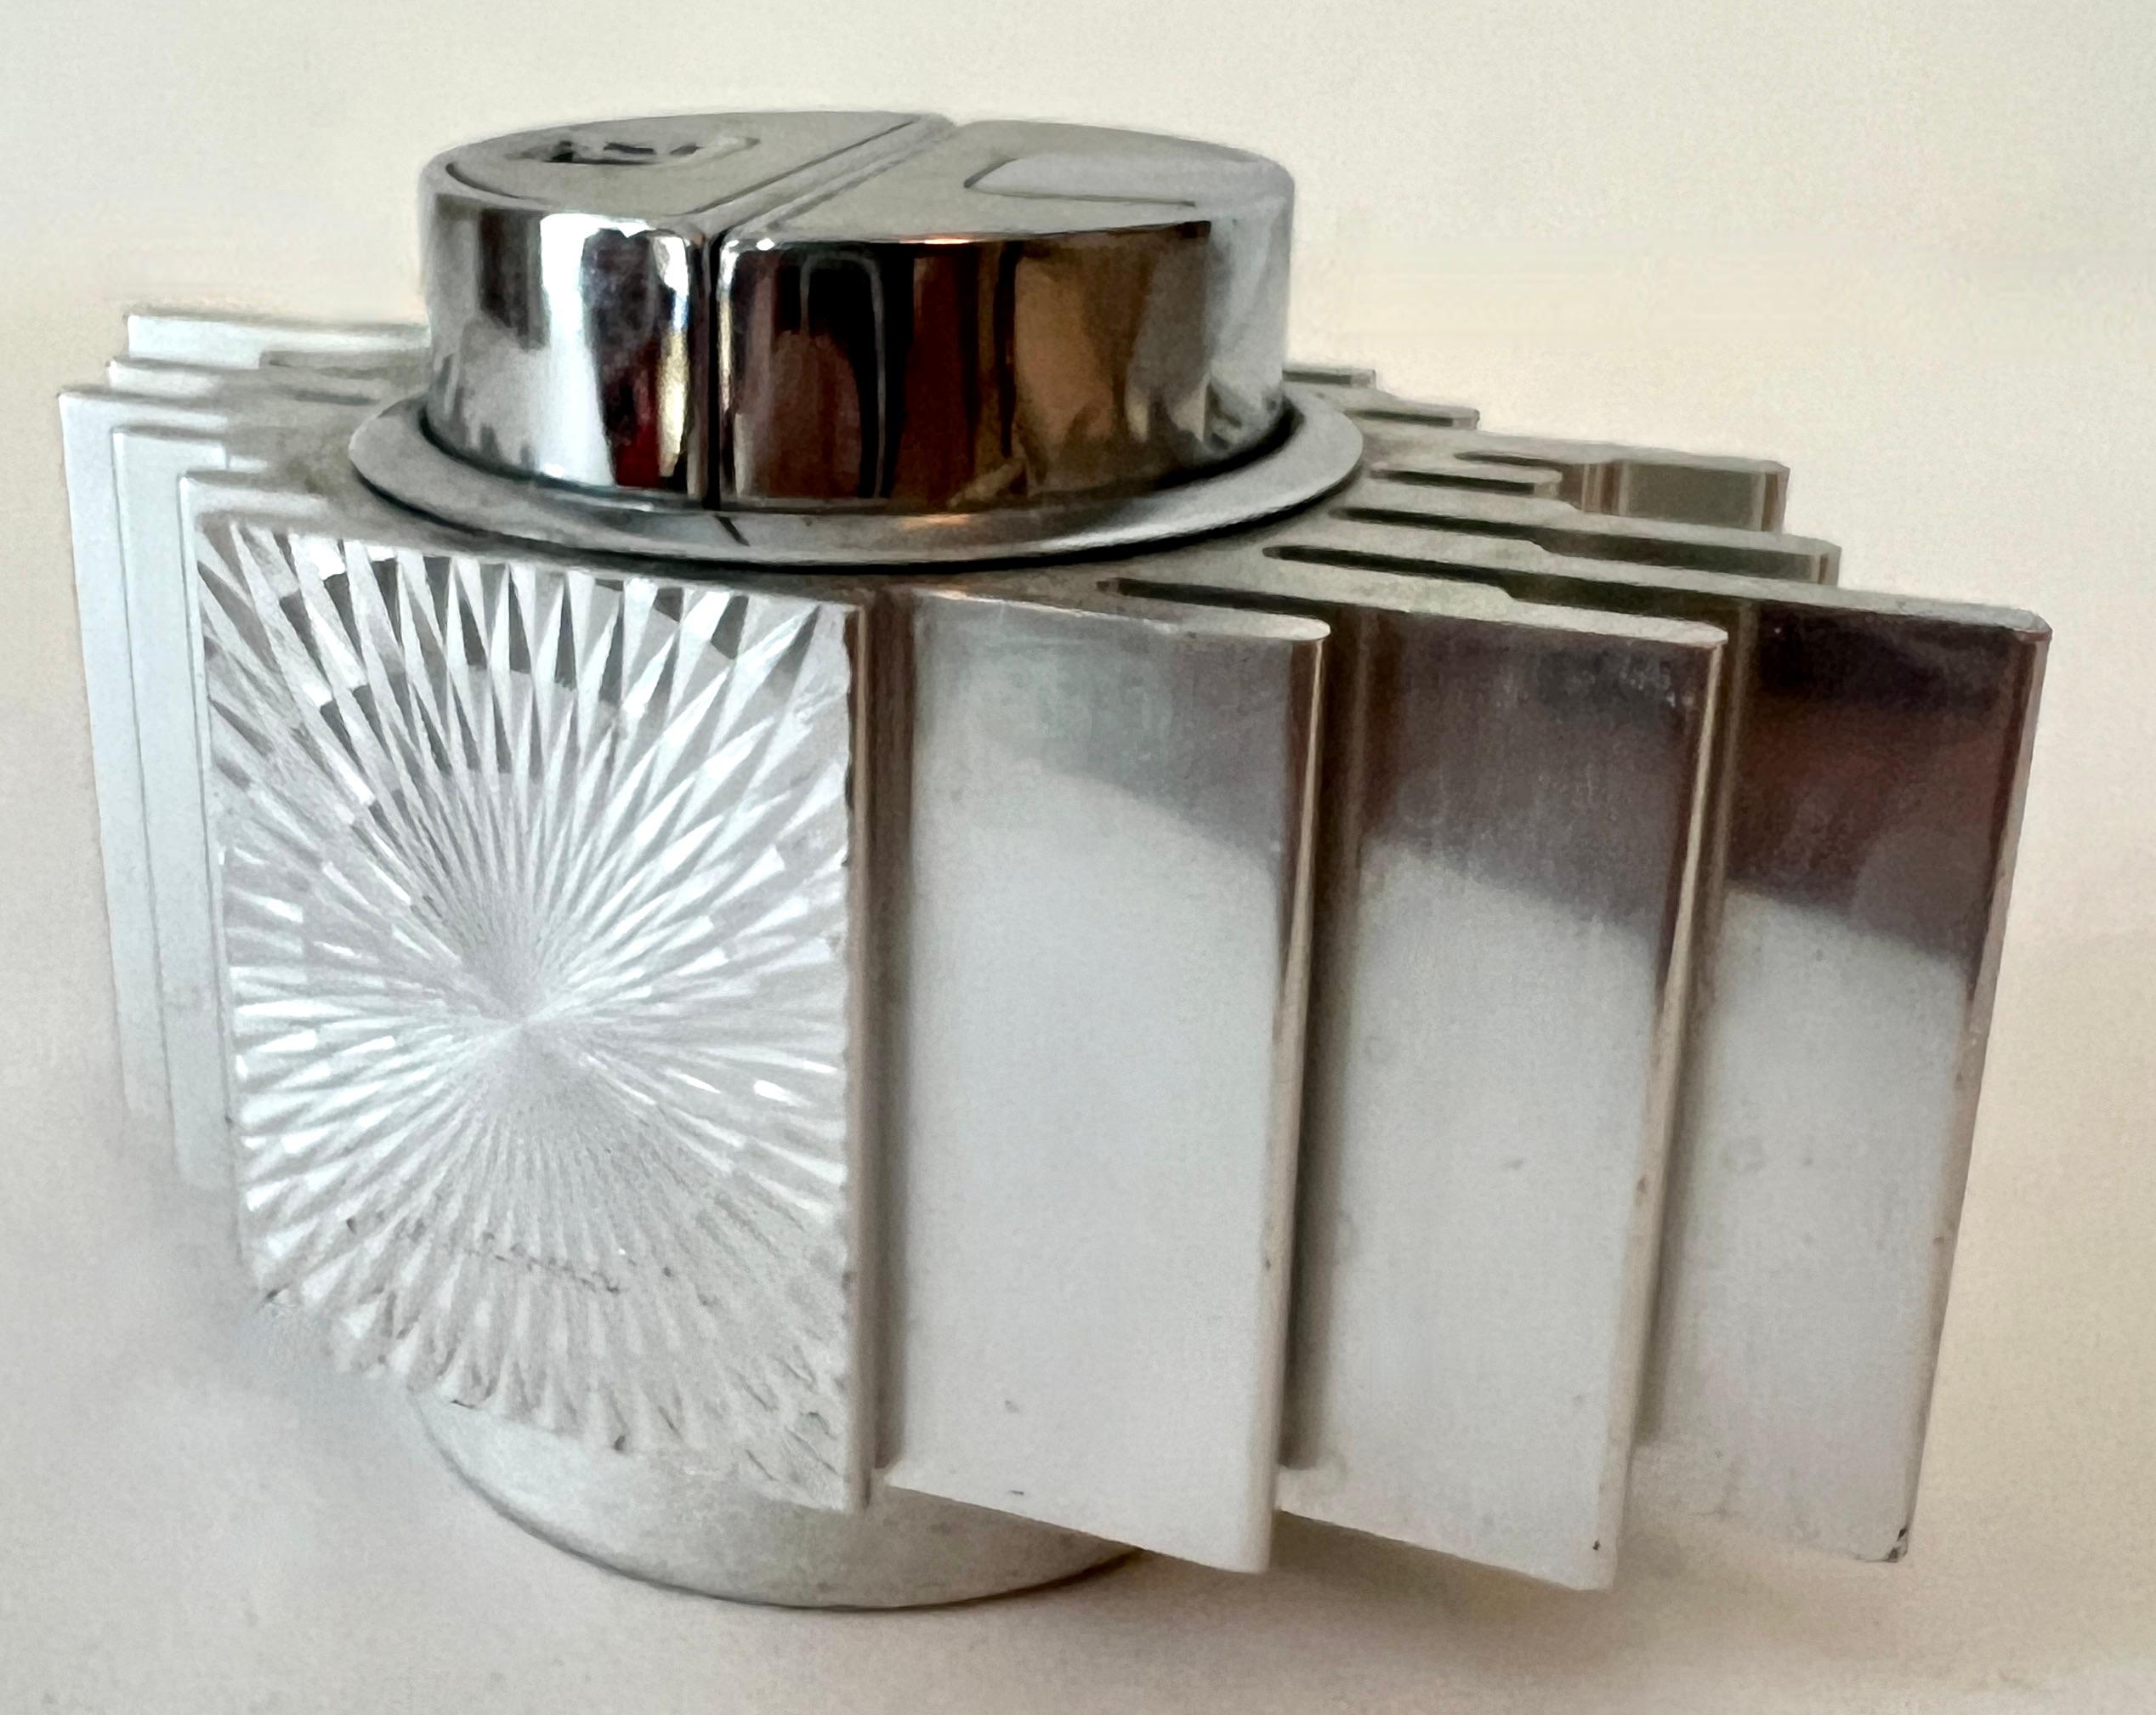 A wonderful Aluminum Art Deco Table lighter by Saroma, made in Japan, 1960.

A compliment to the cocktail table, desk or side table - in any room.  The lighter is perfect for Cigars, cigarettes, and 420!

A stunning and special piece.. in good